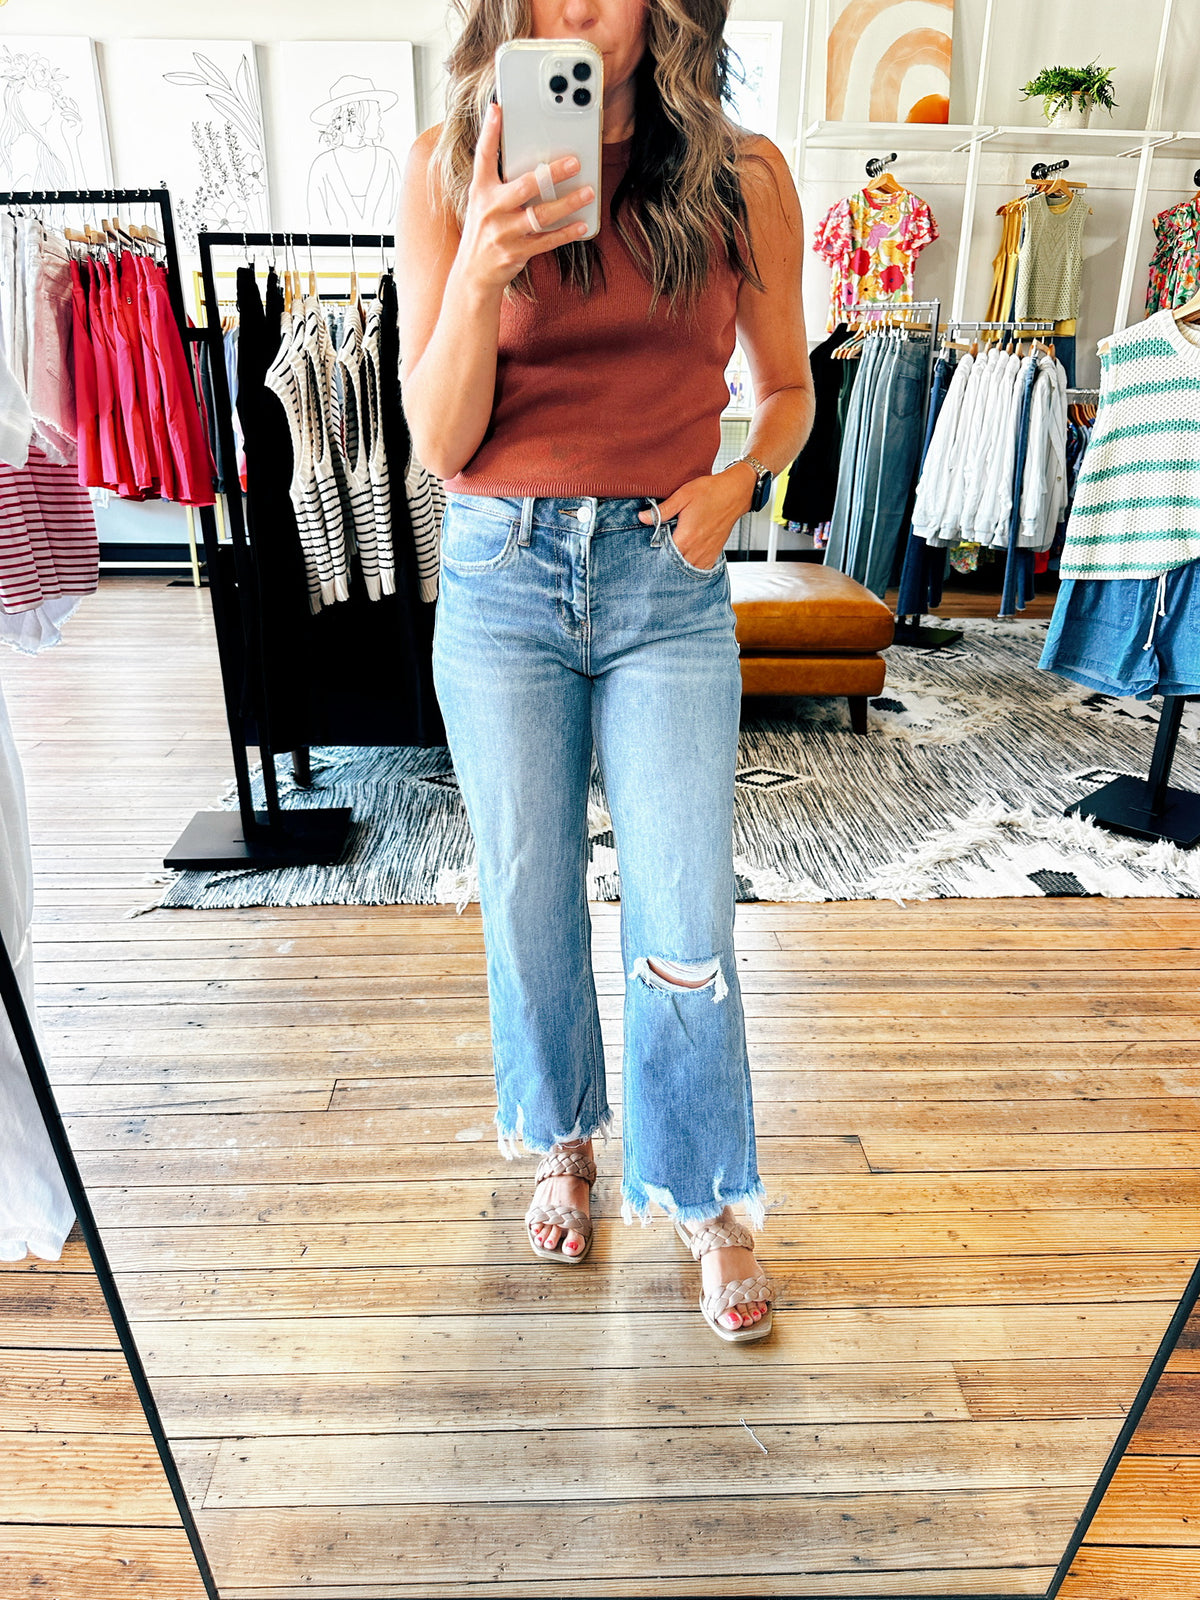 Front View. High Rise Dad Jeans-BottomsWomen's High Rise Dad Jeans | VerClare Boutique | Chenoa, IL-Women's High Rise Dad Jeans! These jeans fit true to size and have a nice stretch to them. Available in sizes 24, 25, 26, 27, 28, 29, 30, 31, 32. Located in Chenoa, Illinois about 20 minutes outside of Bloomington & Normal, IL in McLean County. Free Shipping on eligible Orders. Shop Pay Accepted.-VerClare Boutique